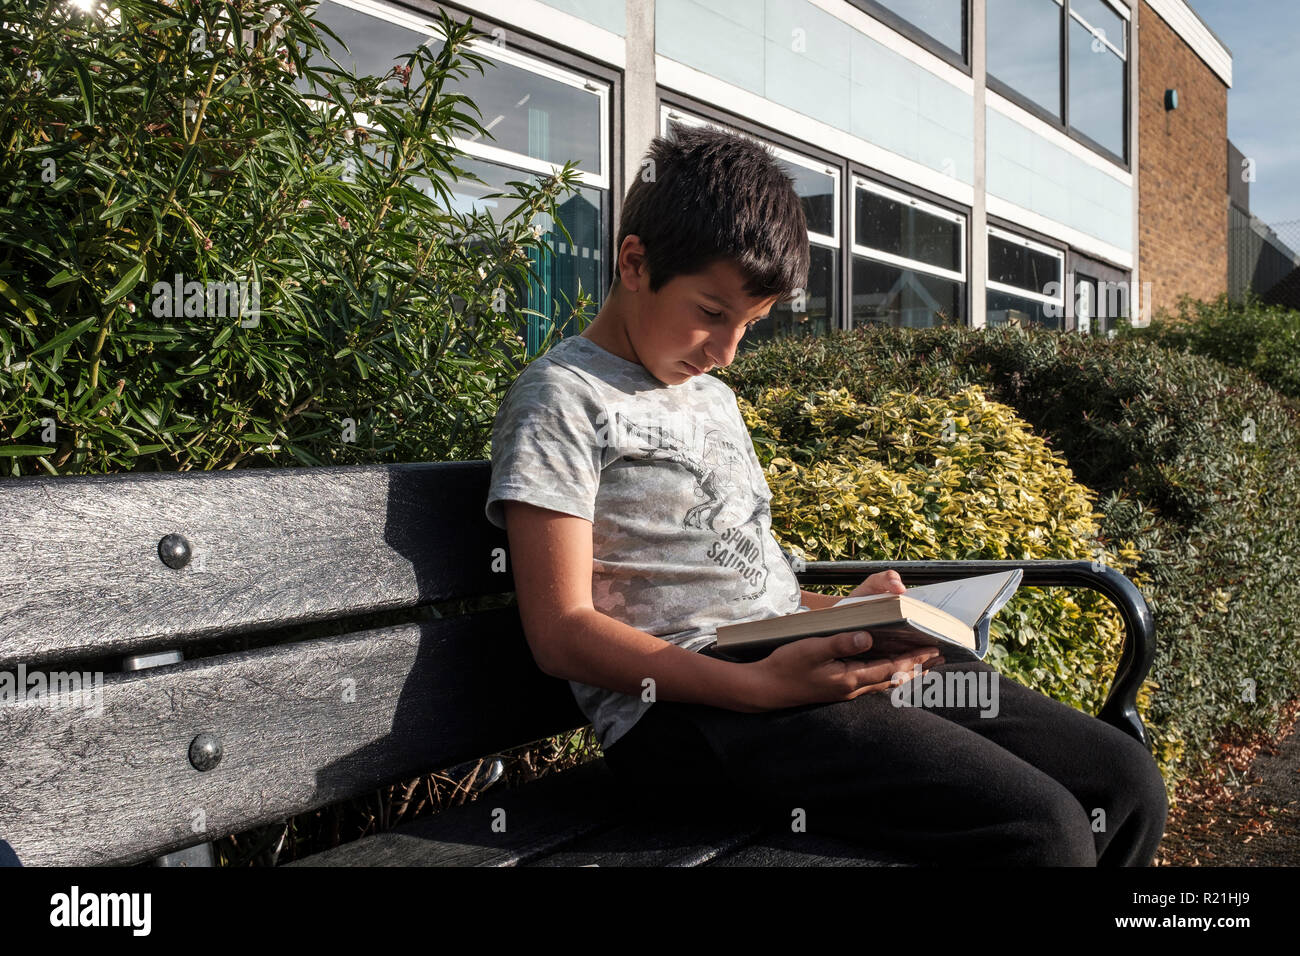 Surrey,UK- boy ,11 years  old,sitting outdoors reading a library book. Stock Photo